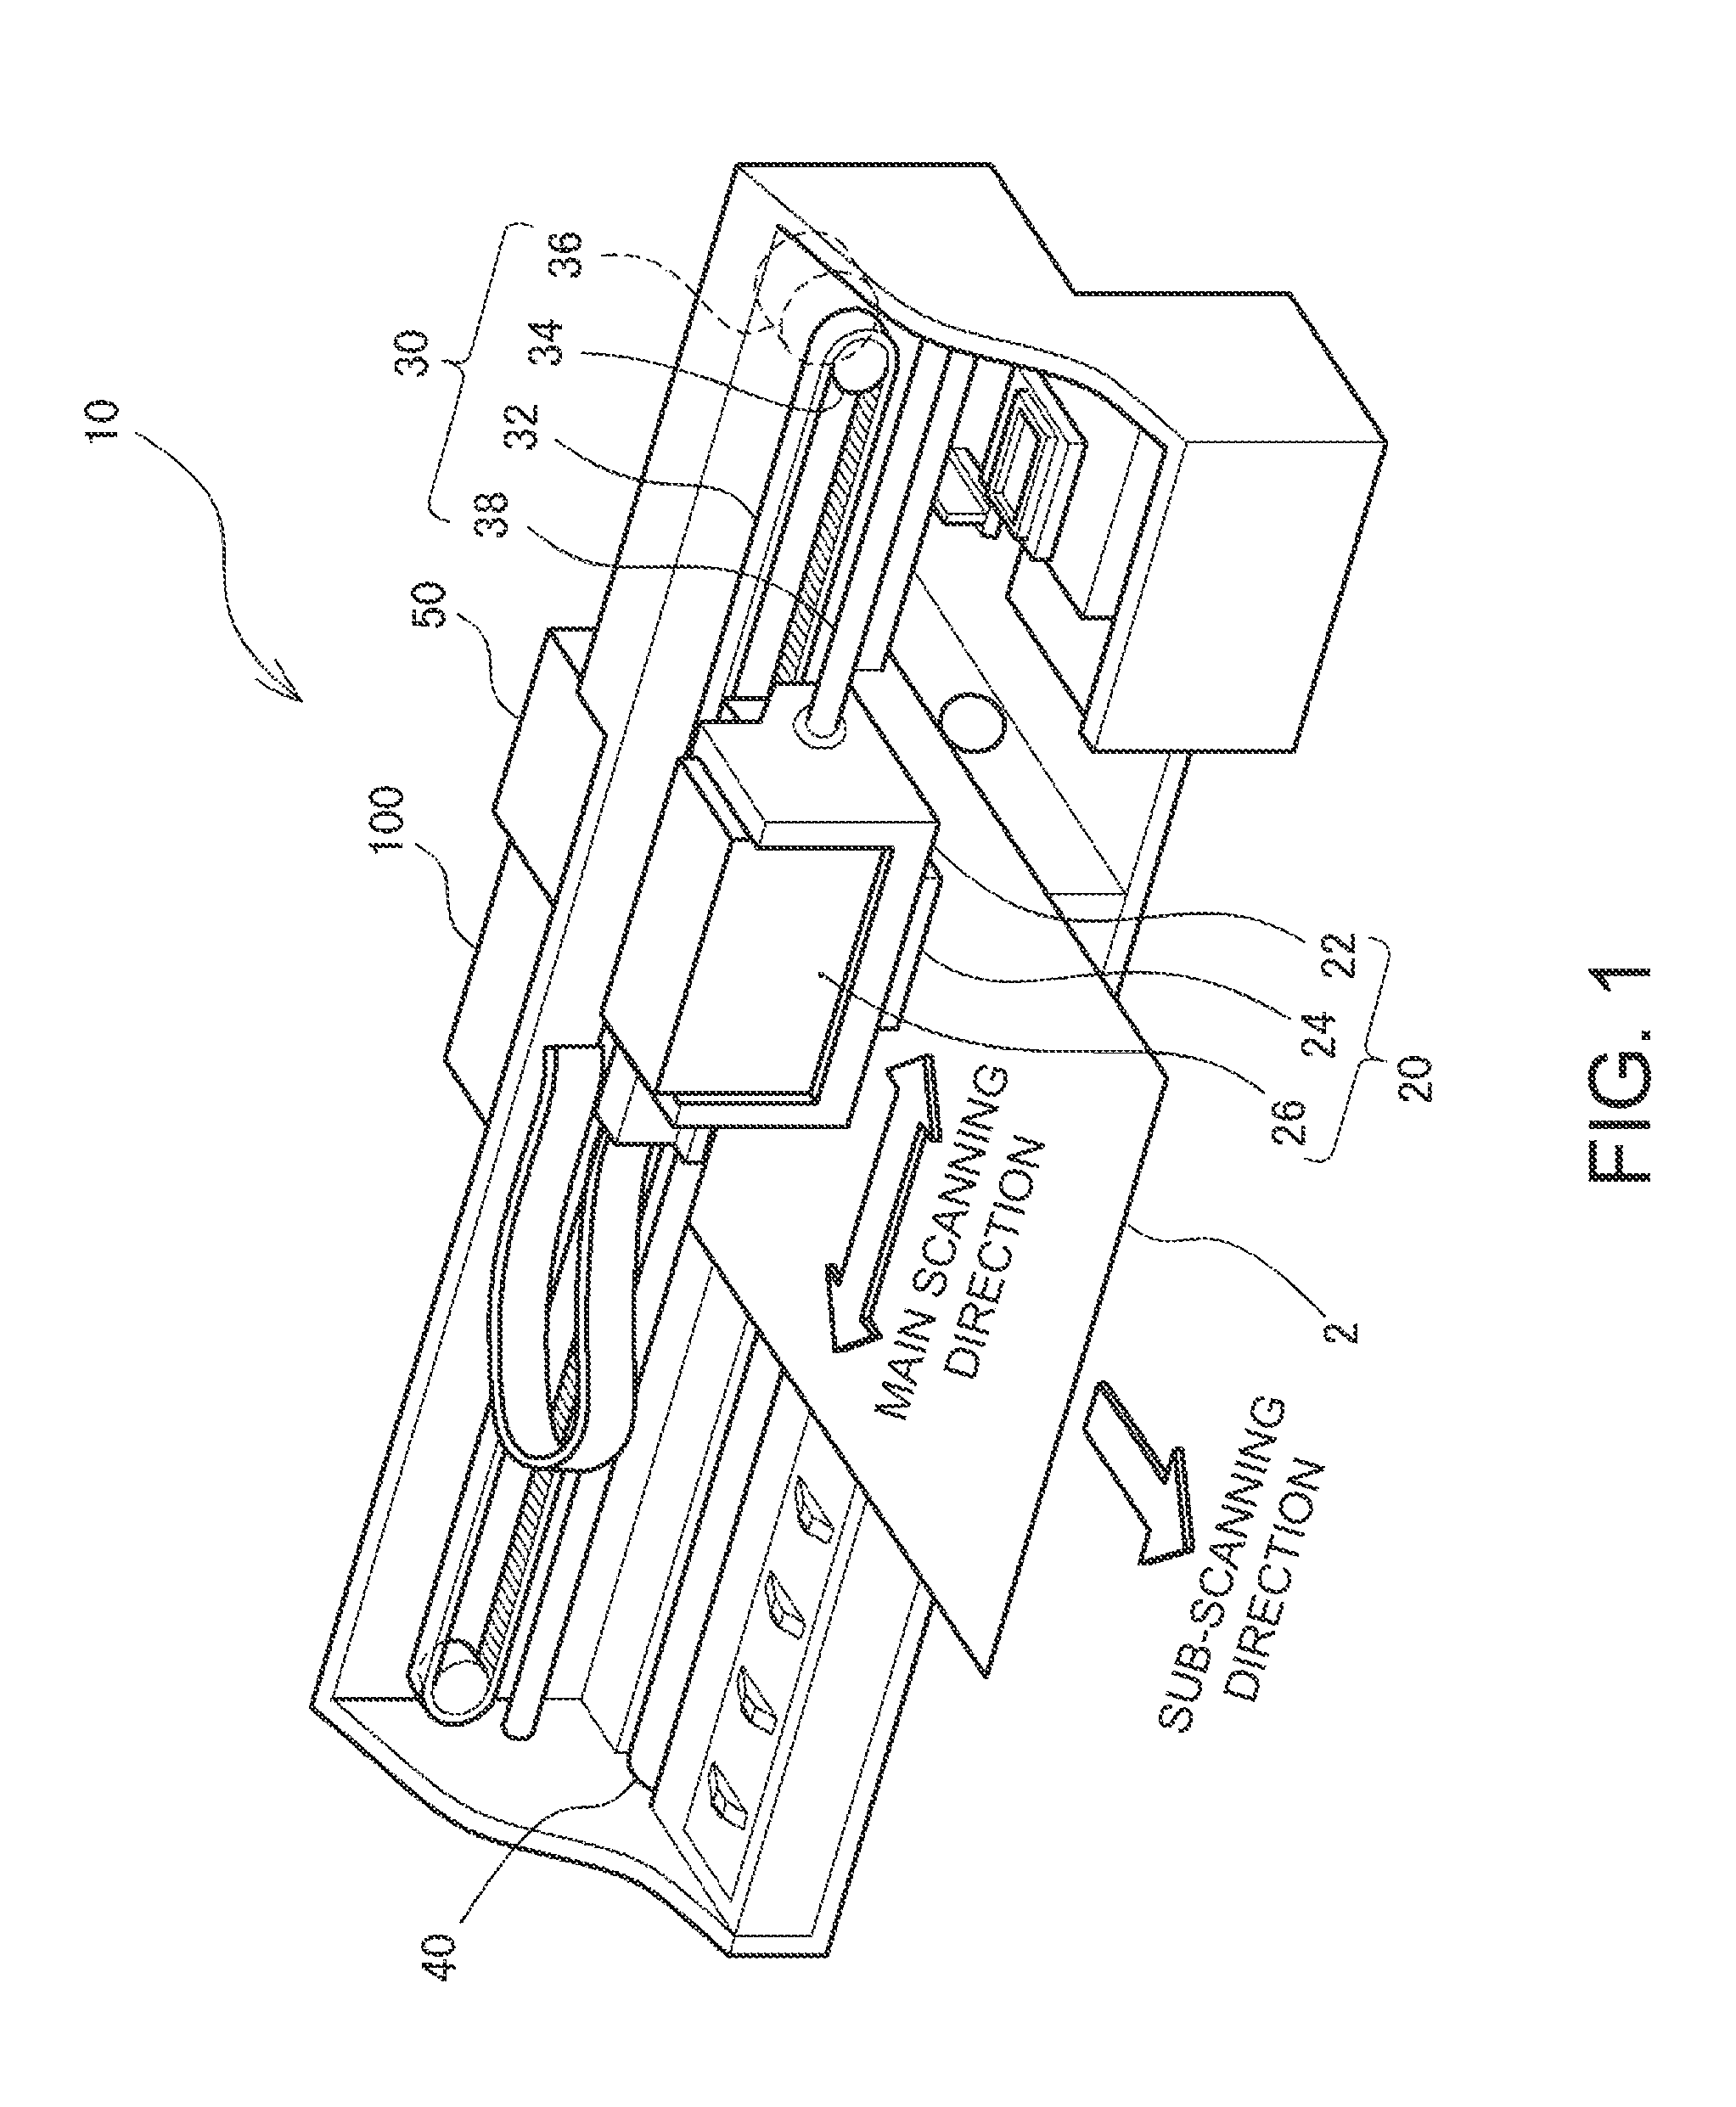 Load driving circuit, liquid ejection device, and printing apparatus